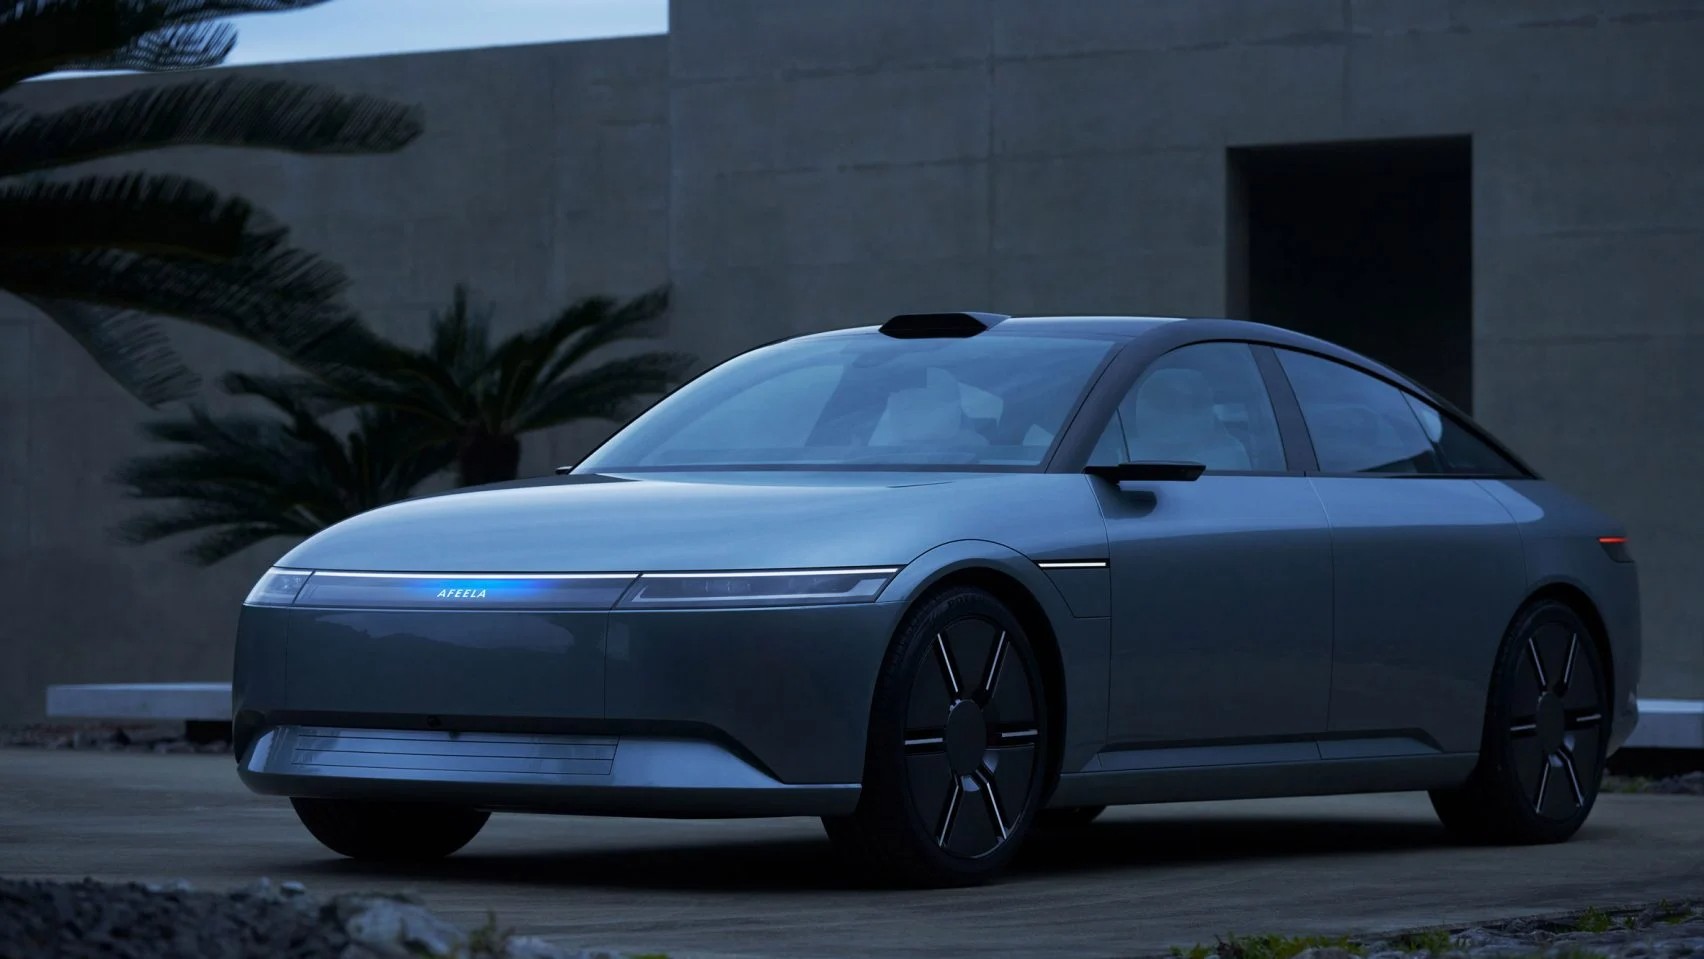 Sony's first-ever electric car prototype